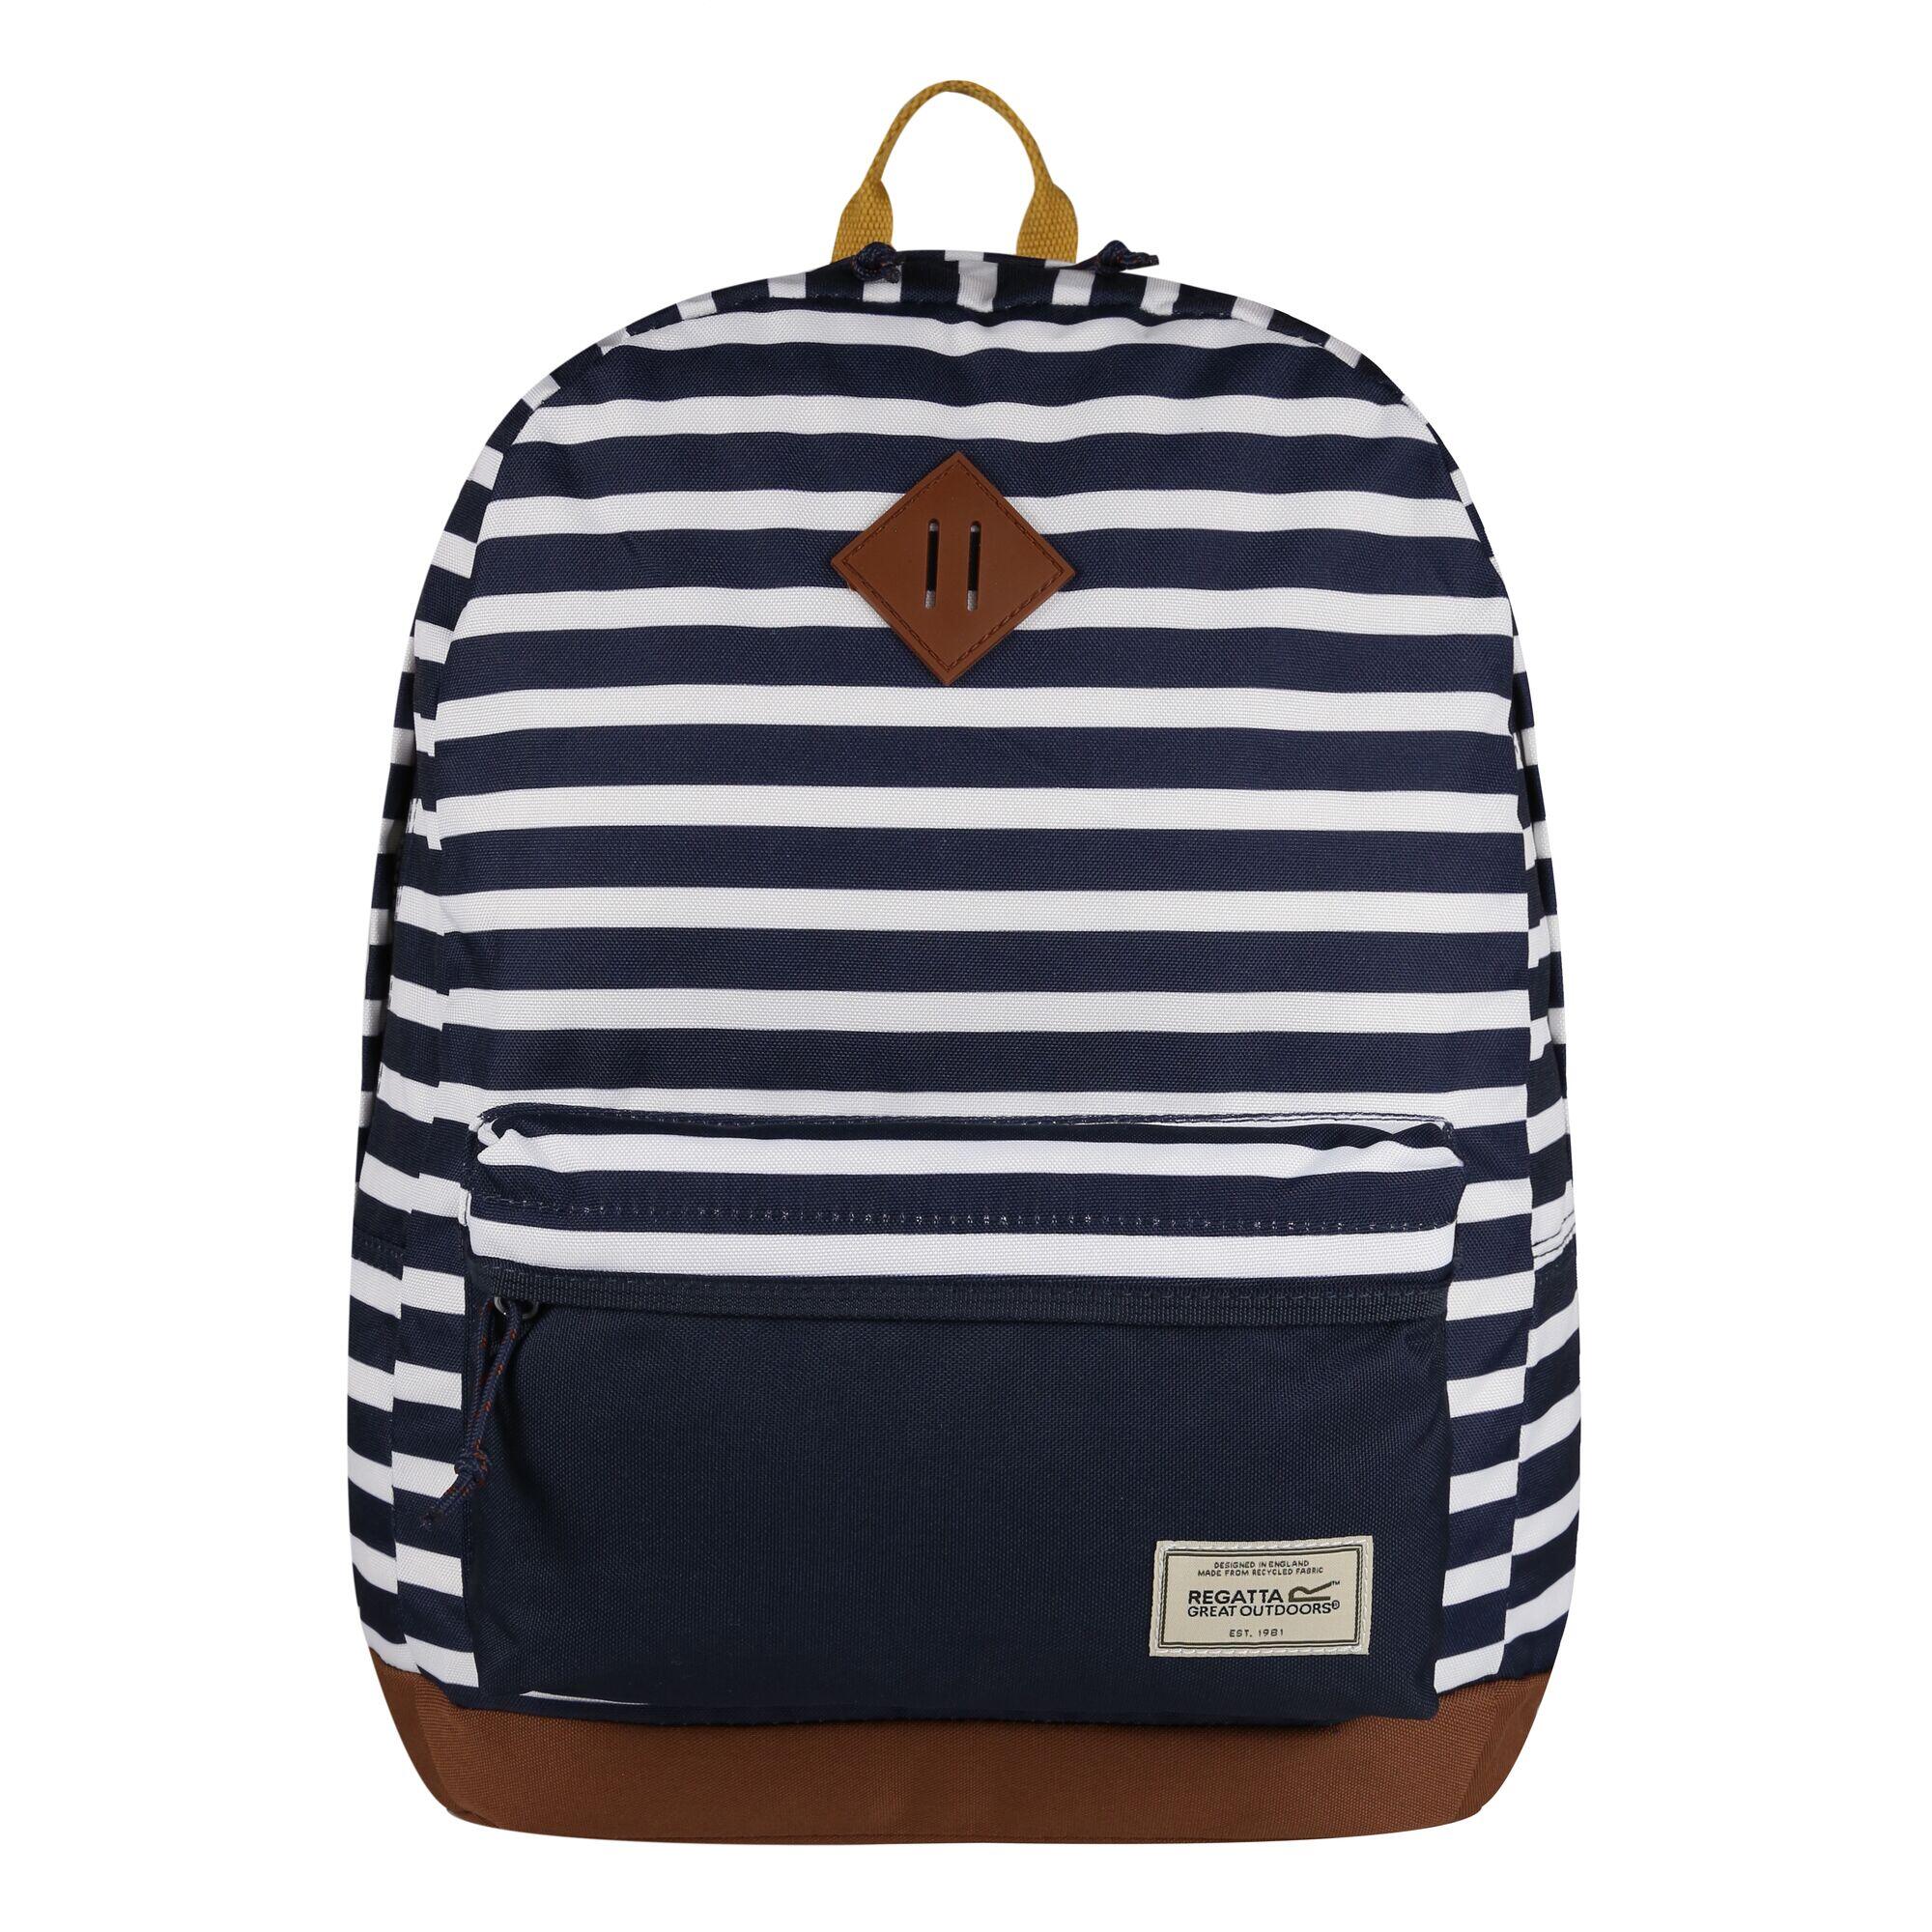 Stamford 20L Adults' Unisex Hiking Backpack - Navy Stripe 1/3